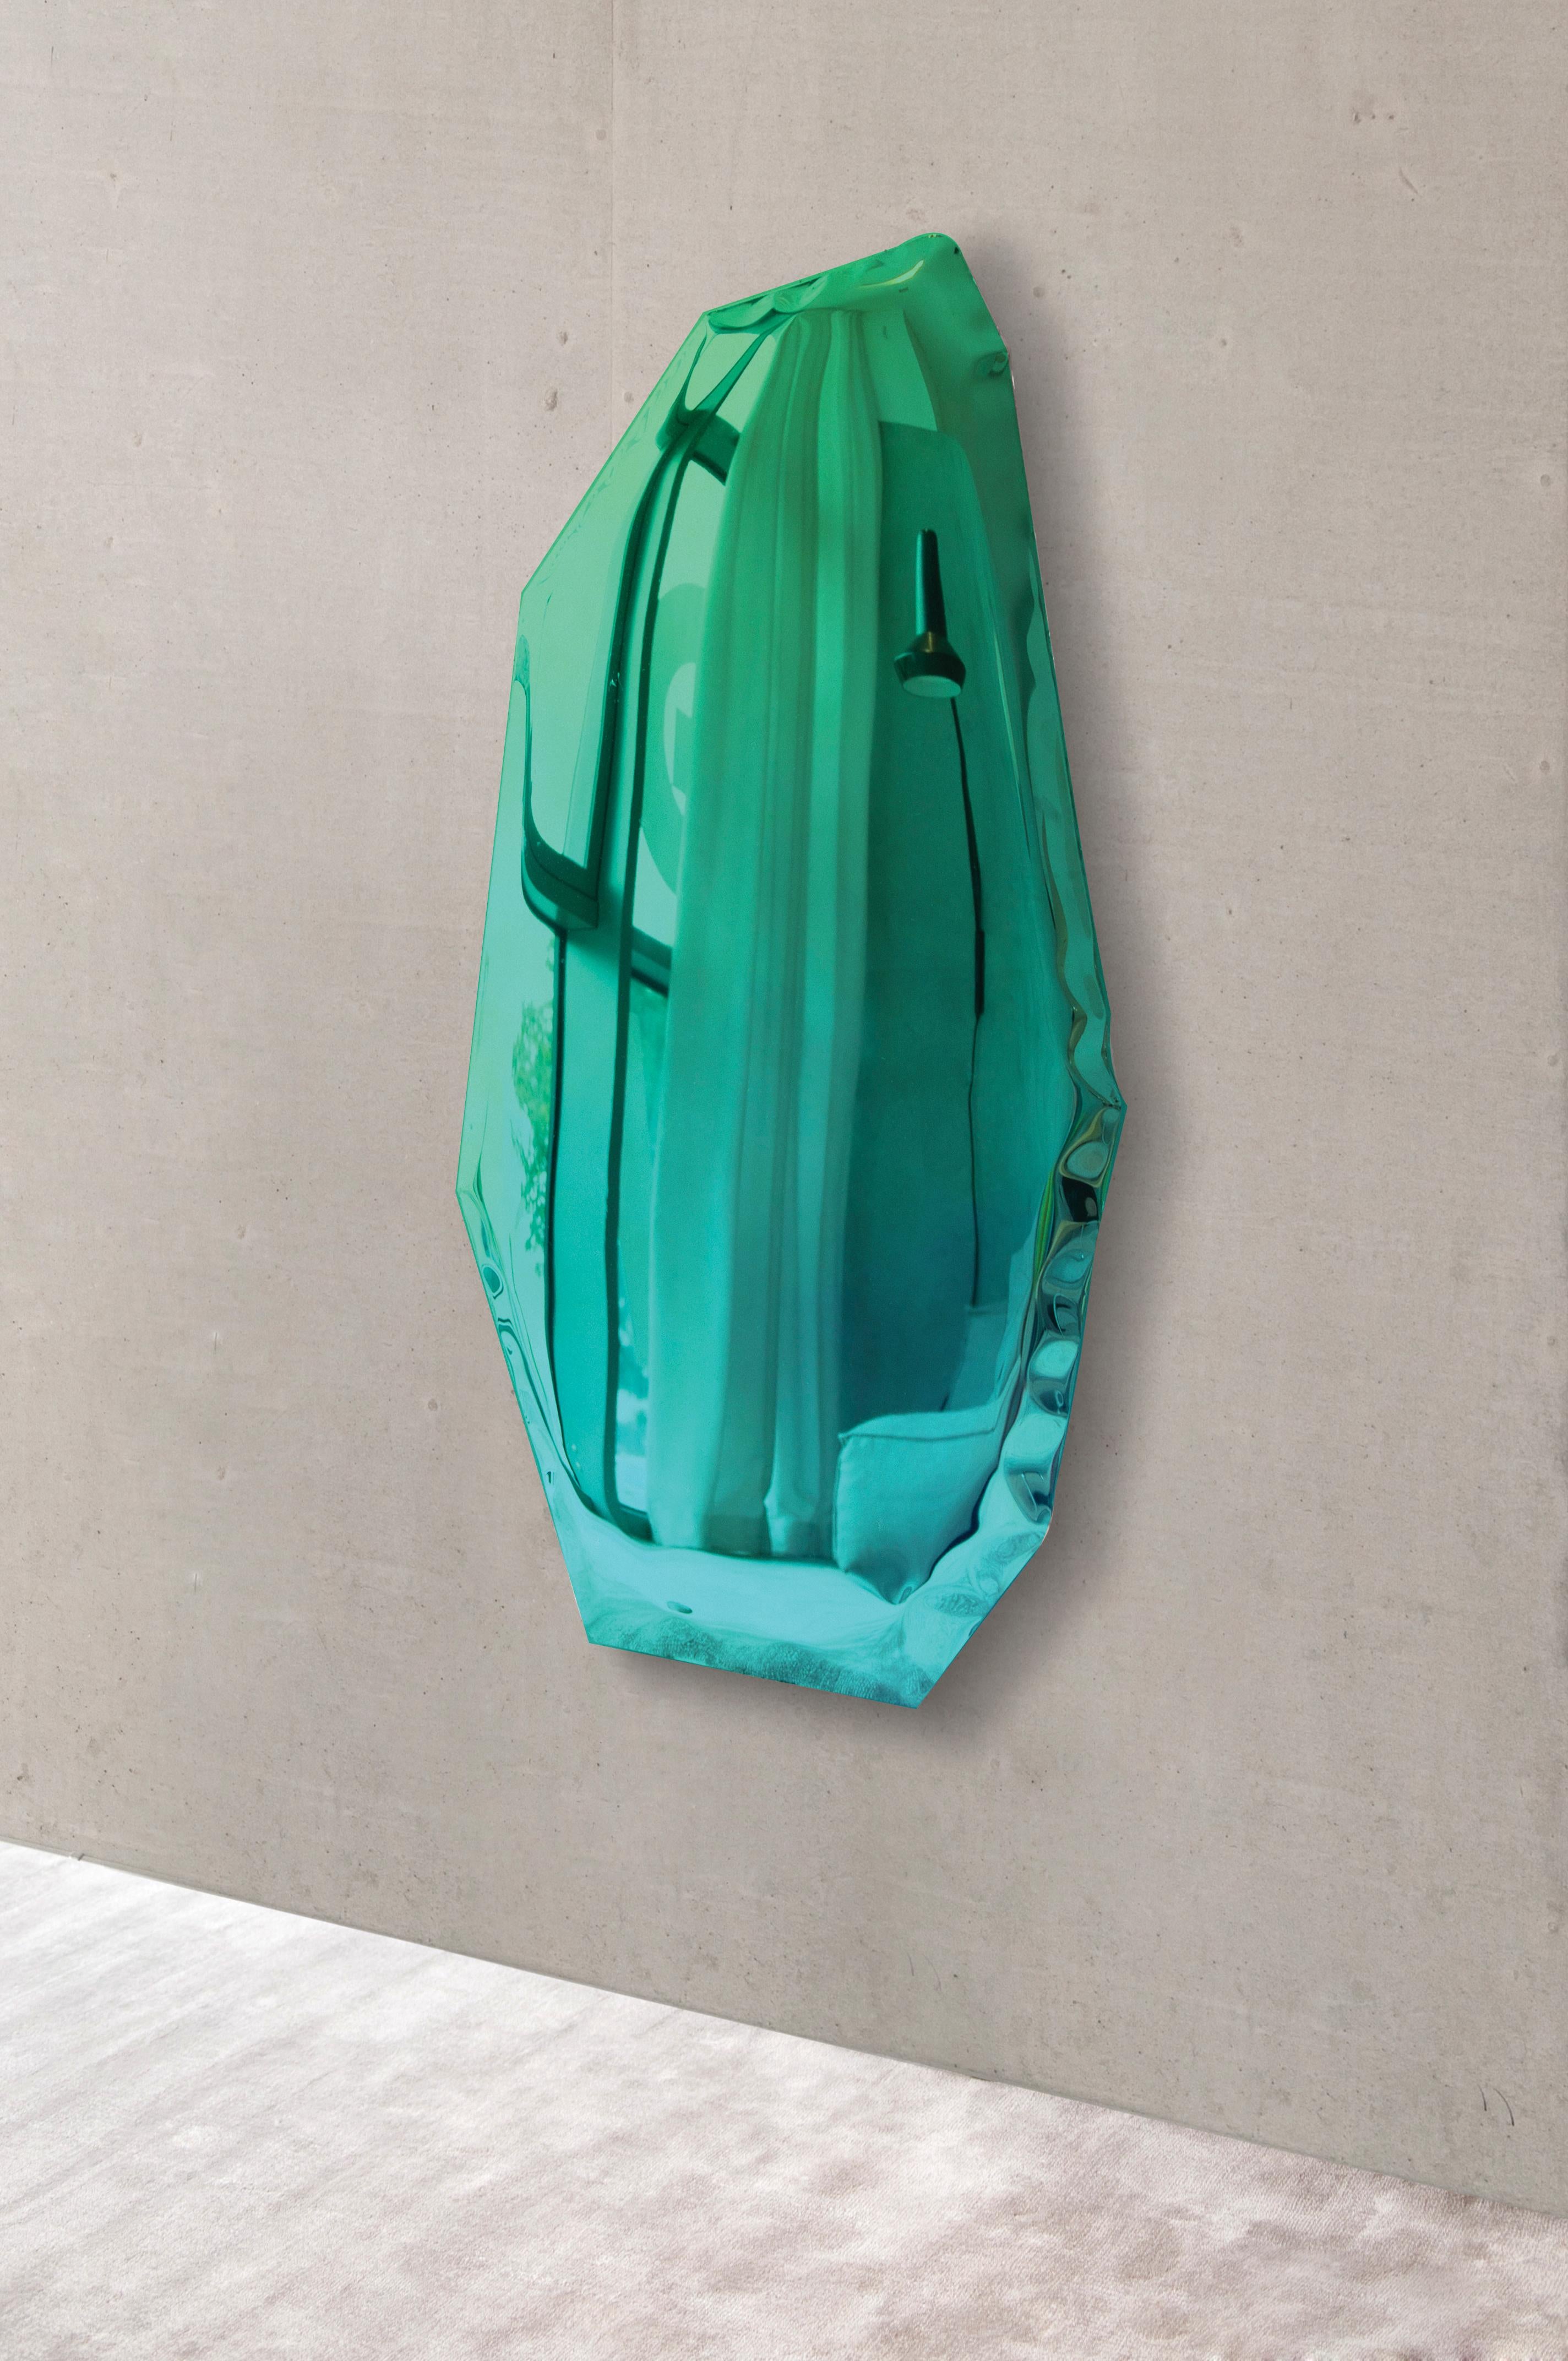 Tafla C4 Polished Gradient of Emerald and Sapphire Color Stainless Steel Wall In New Condition For Sale In Beverly Hills, CA